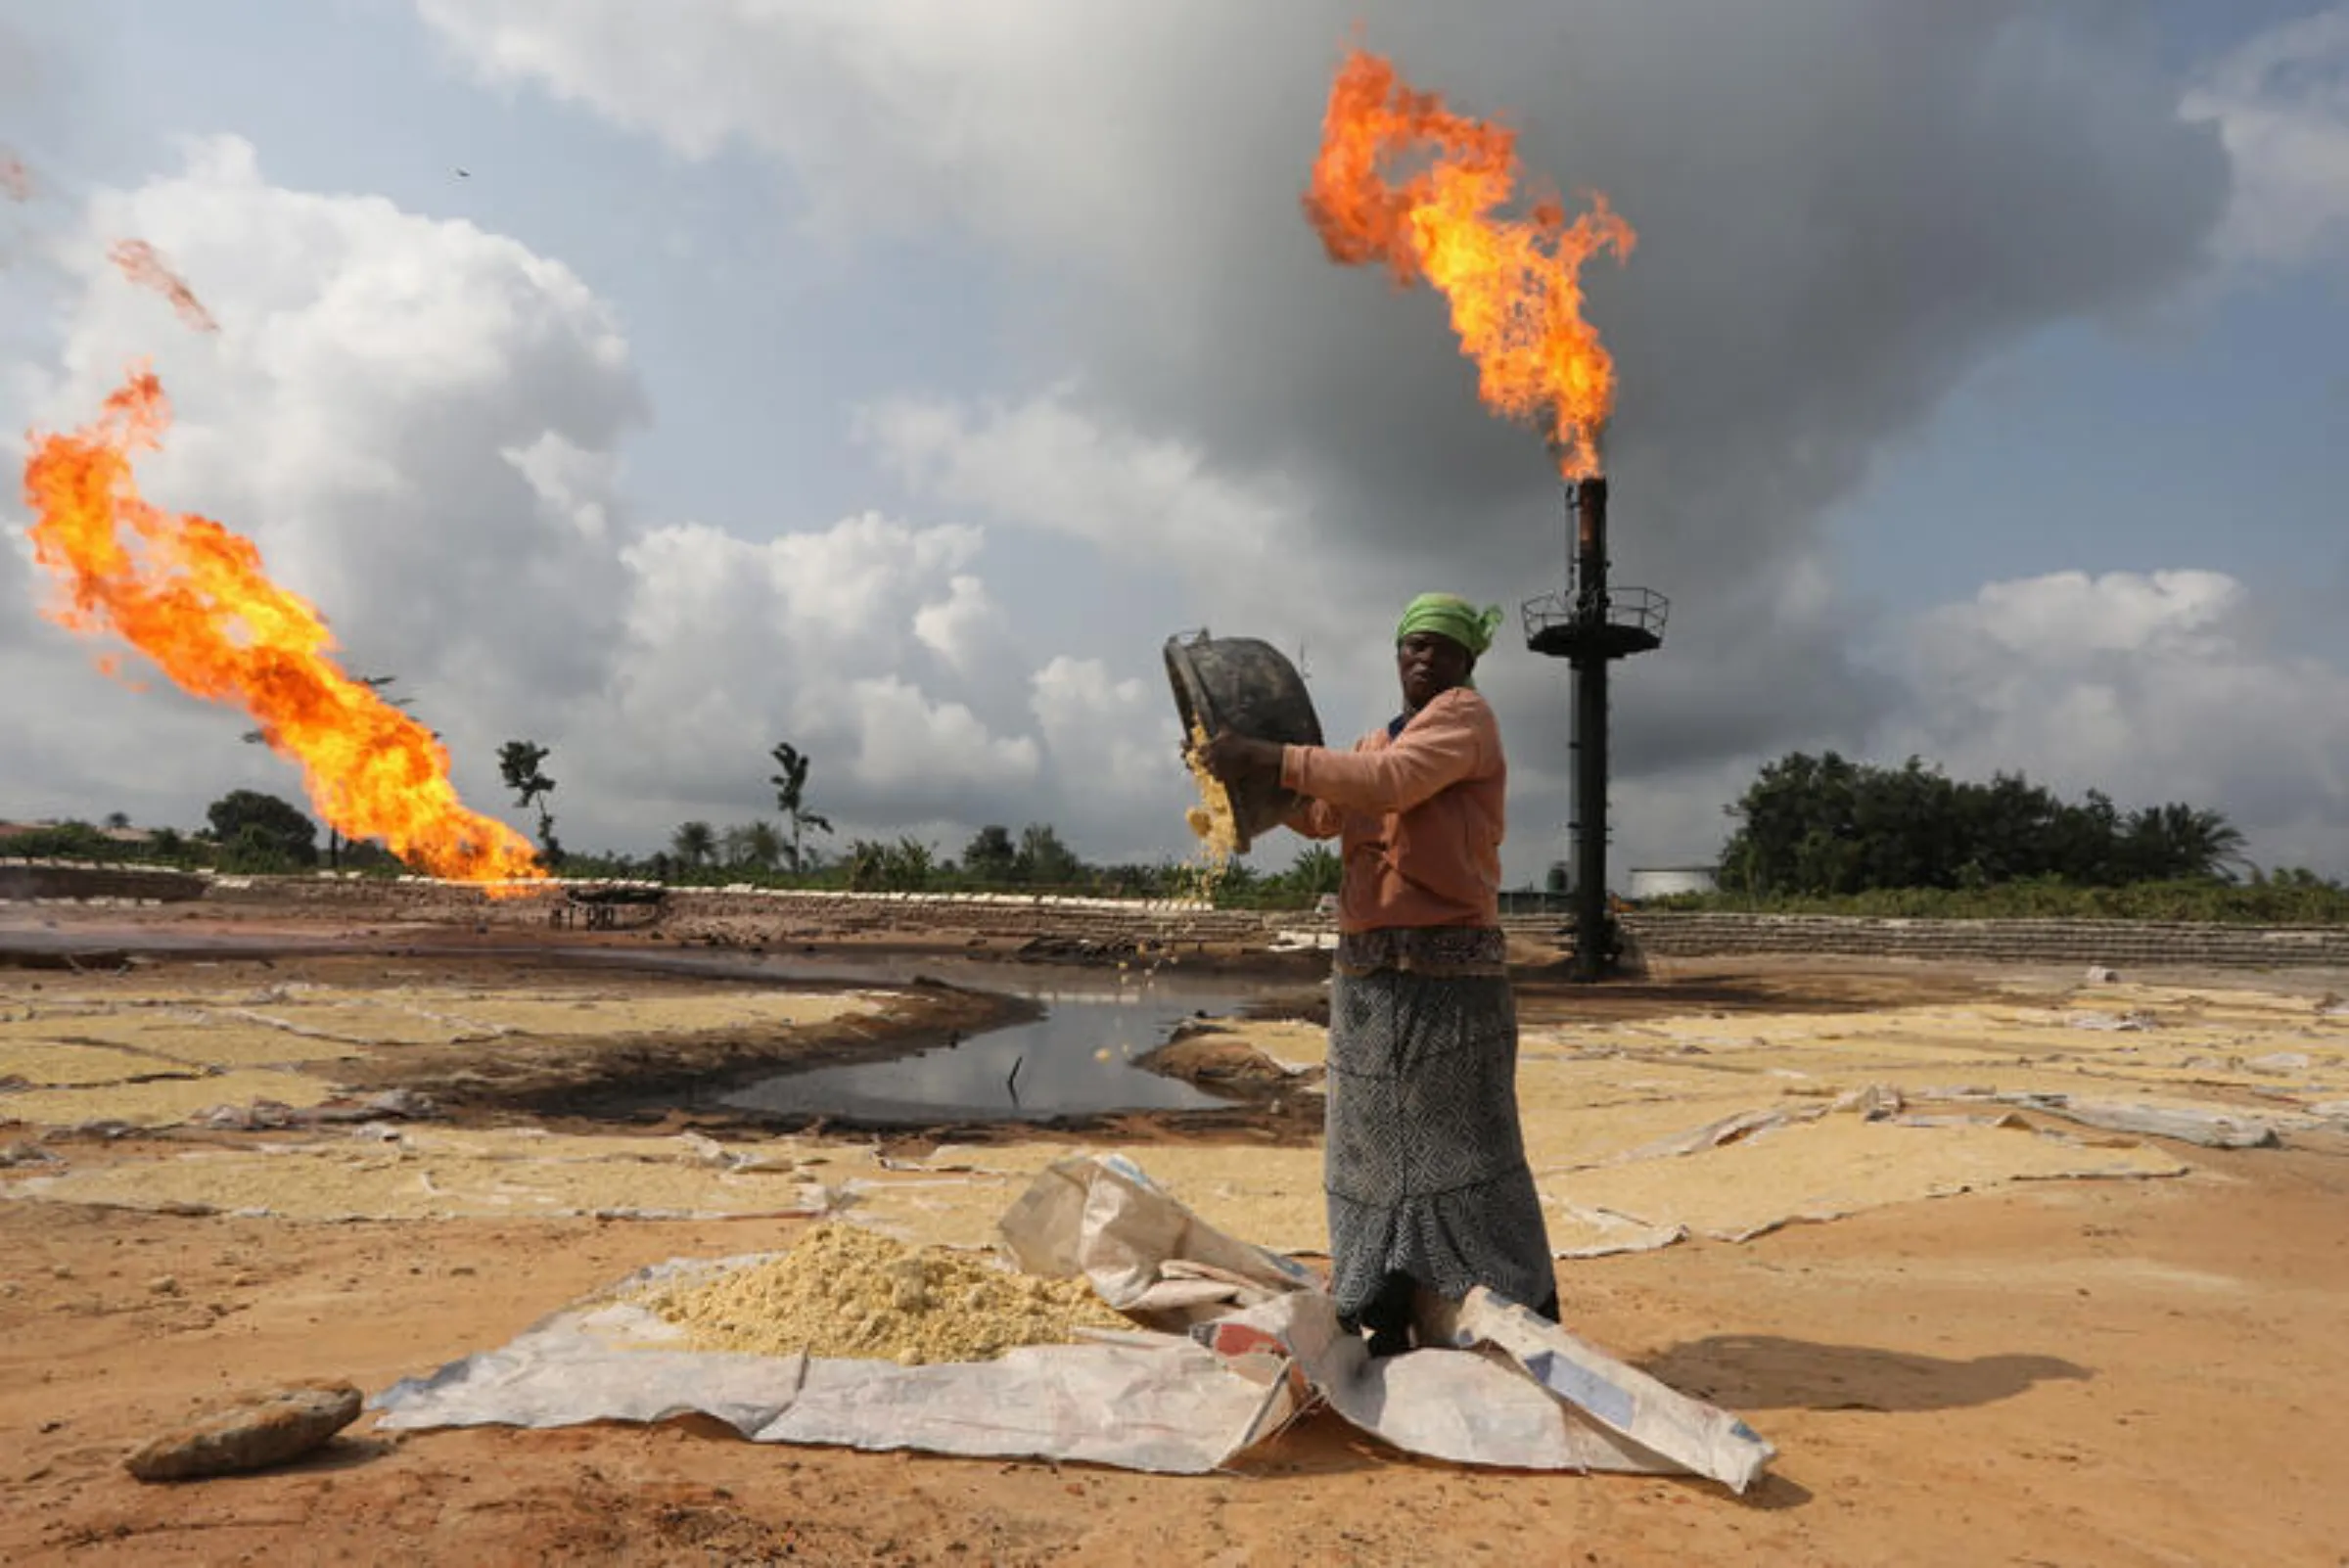 A woman empties a plastic bowl filled with tapioca on sewn sacks laid on the ground close to a gas flaring furnace in Ughelli, Delta State, Nigeria September 17, 2020. REUTERS/Afolabi Sotunde